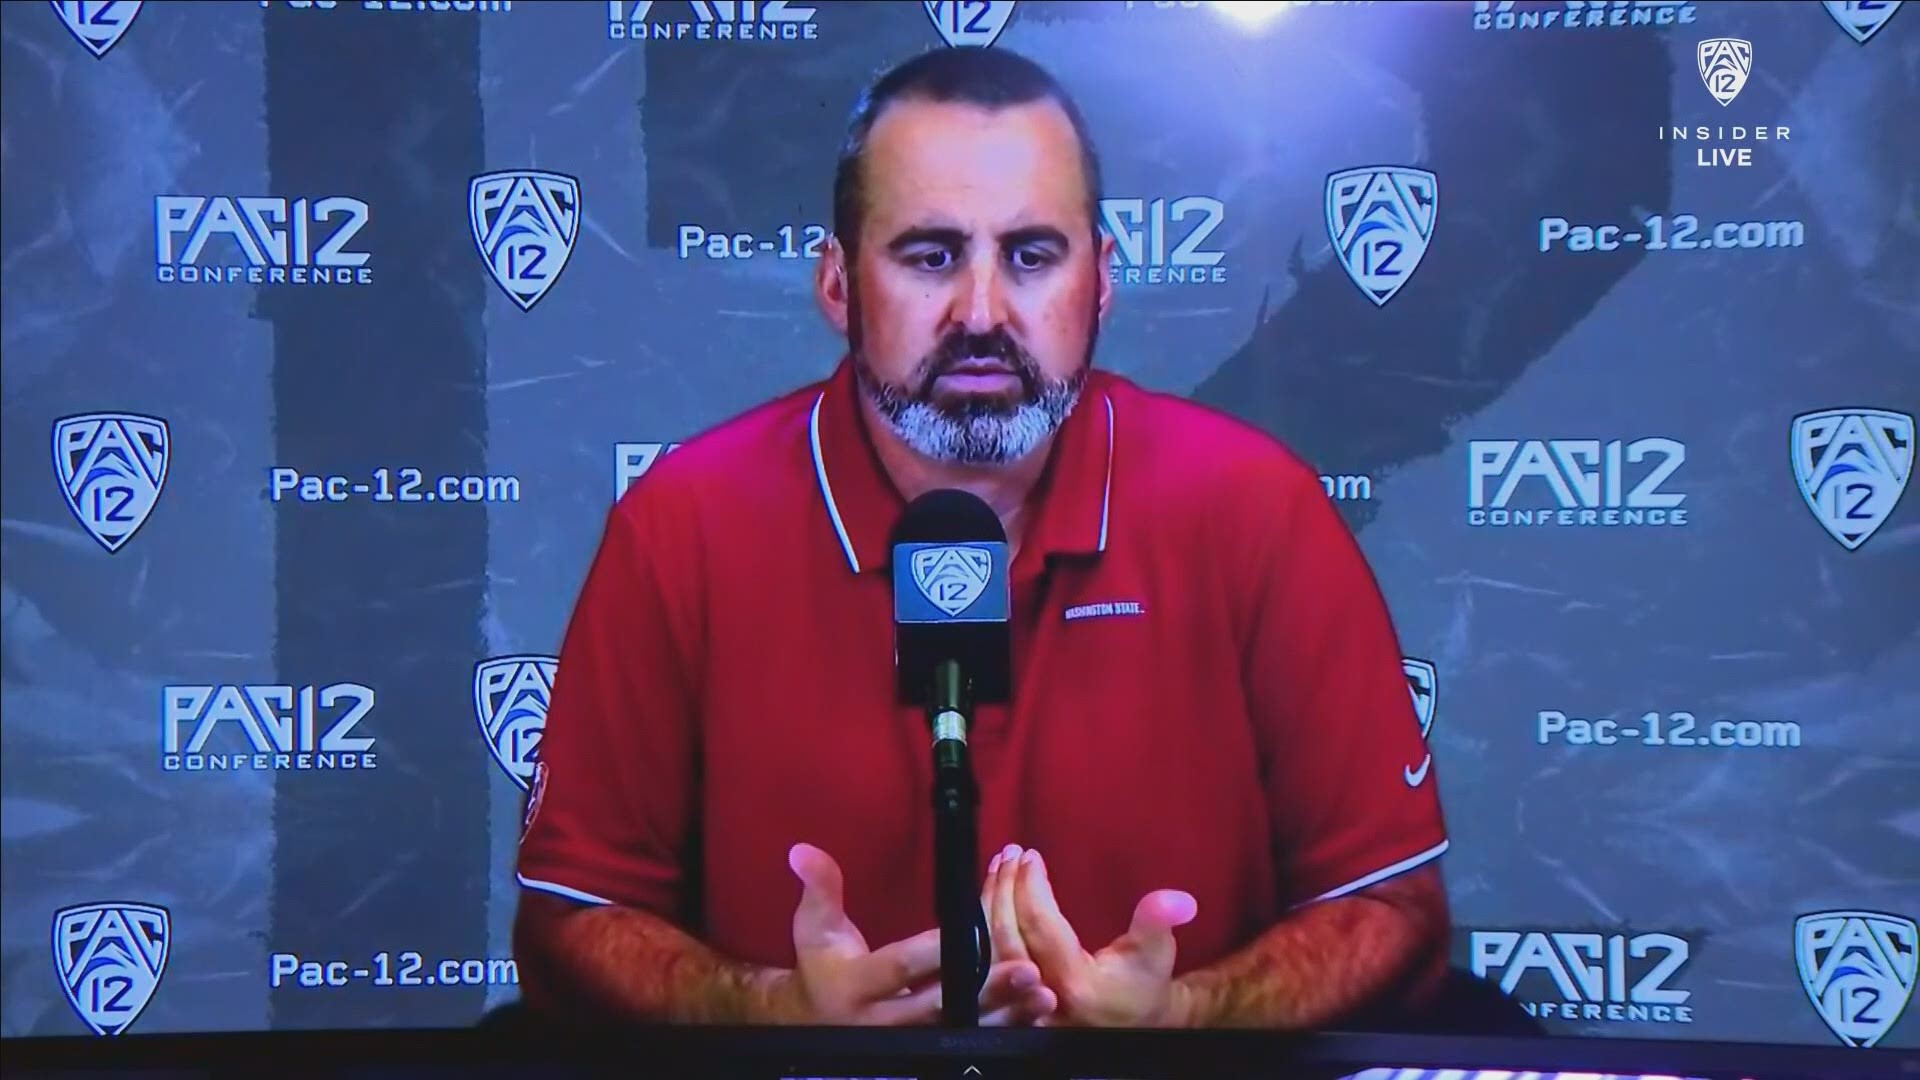 Washington State University Football Coach Nick Rolovich said Tuesday he plans on "adhering to all policies that are implemented for the unvaccinated."